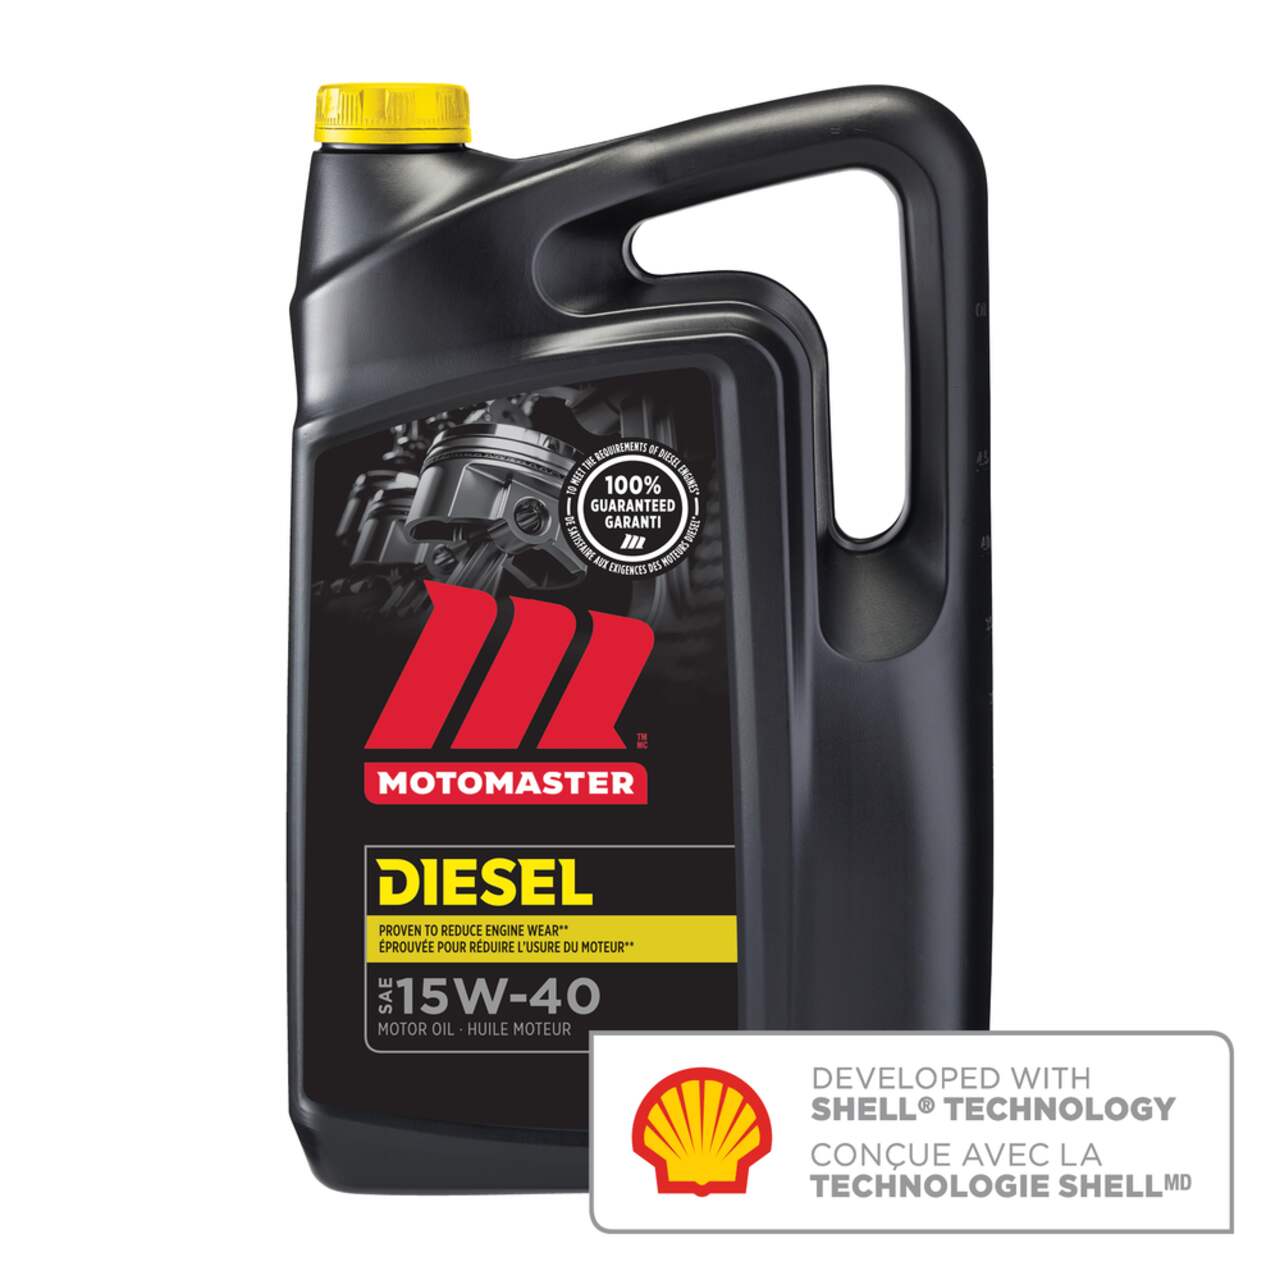 https://media-www.canadiantire.ca/product/automotive/auto-maintenance/oil-pcmo-/0287933/motomaster-conv-diesel-motor-oil-15w40-5-l-929f1351-f340-40b2-ad25-328b960979e9.png?imdensity=1&imwidth=640&impolicy=mZoom